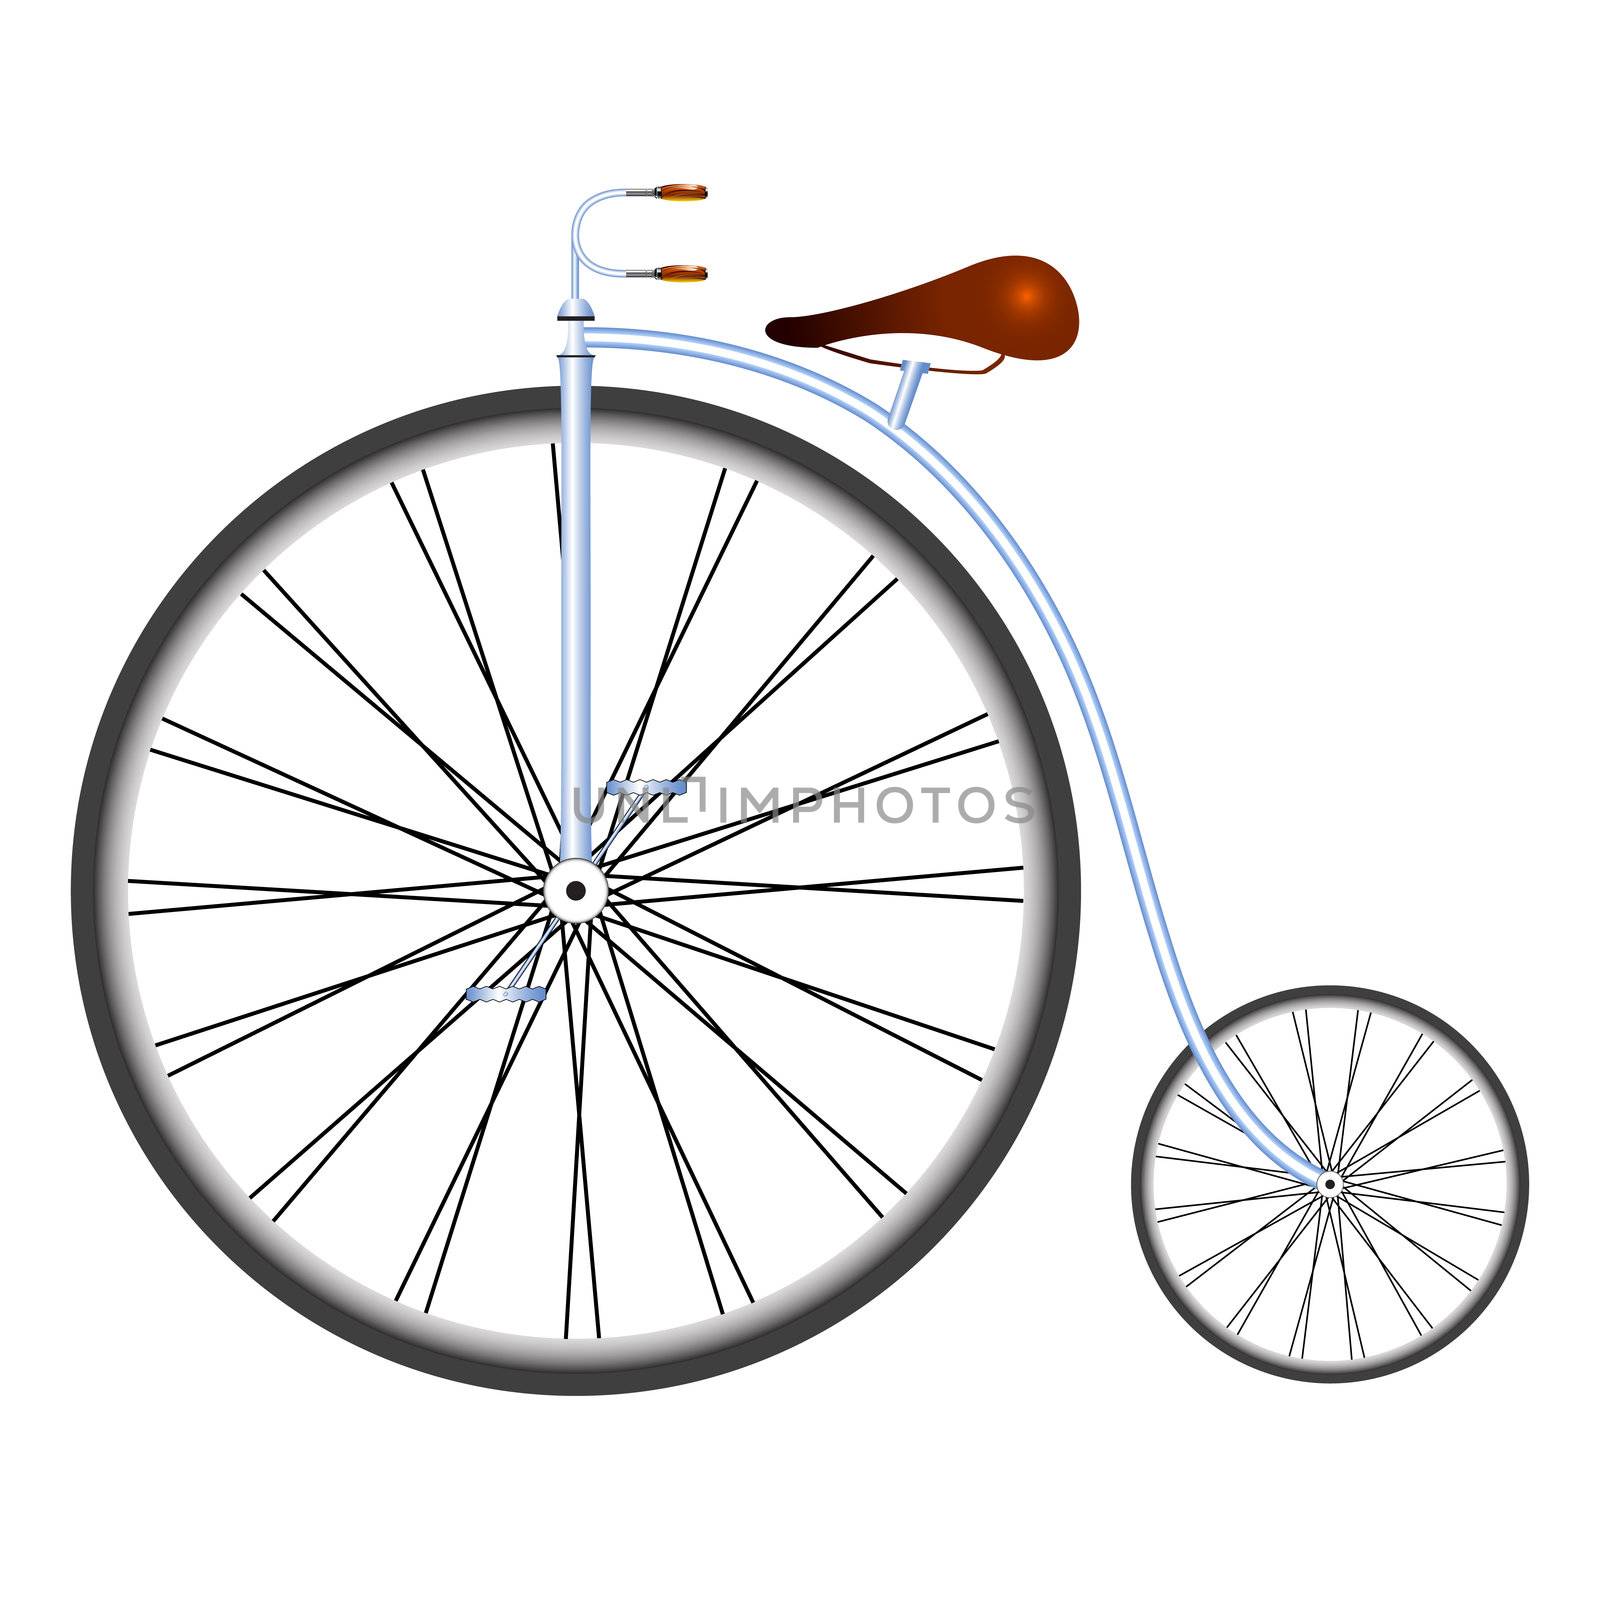 old bicycle against white background, abstract vector art illustration